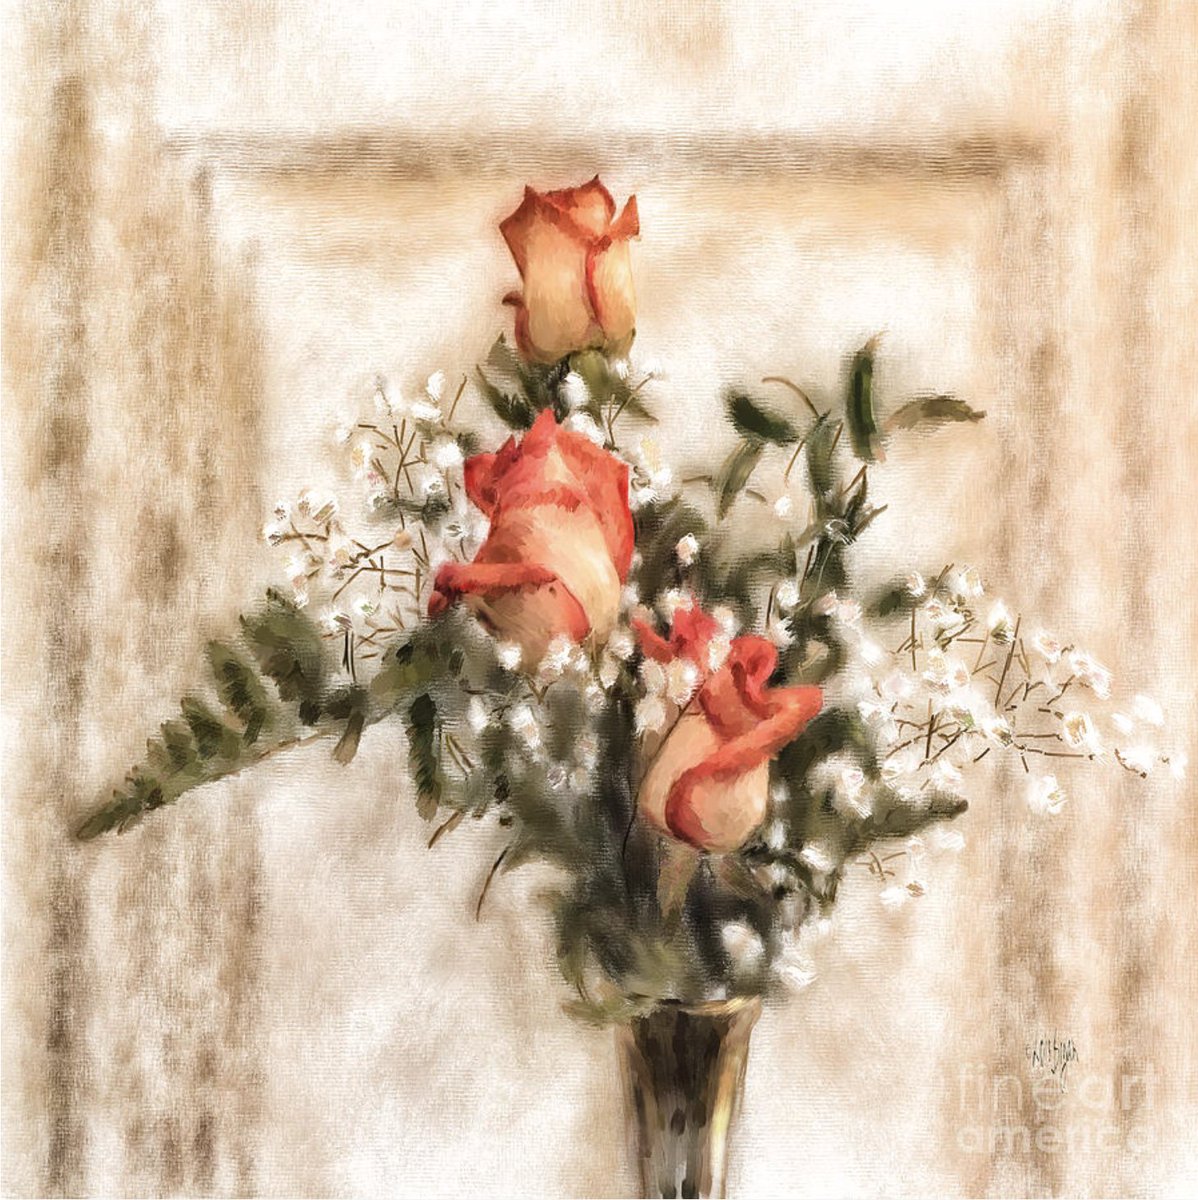 Sincere thanks to my 5/12 #FineArtAmerica client from Montrose, CA. for their purchase of an 8' x 8' canvas print of Vintage Circus Roses. 
lois-bryan.pixels.com/featured/vinta… #art #giftideas #roses #stilllife #NotAi #digitallyhandpainted #CorelPainter #flowers #buyintoart #LoisBryan